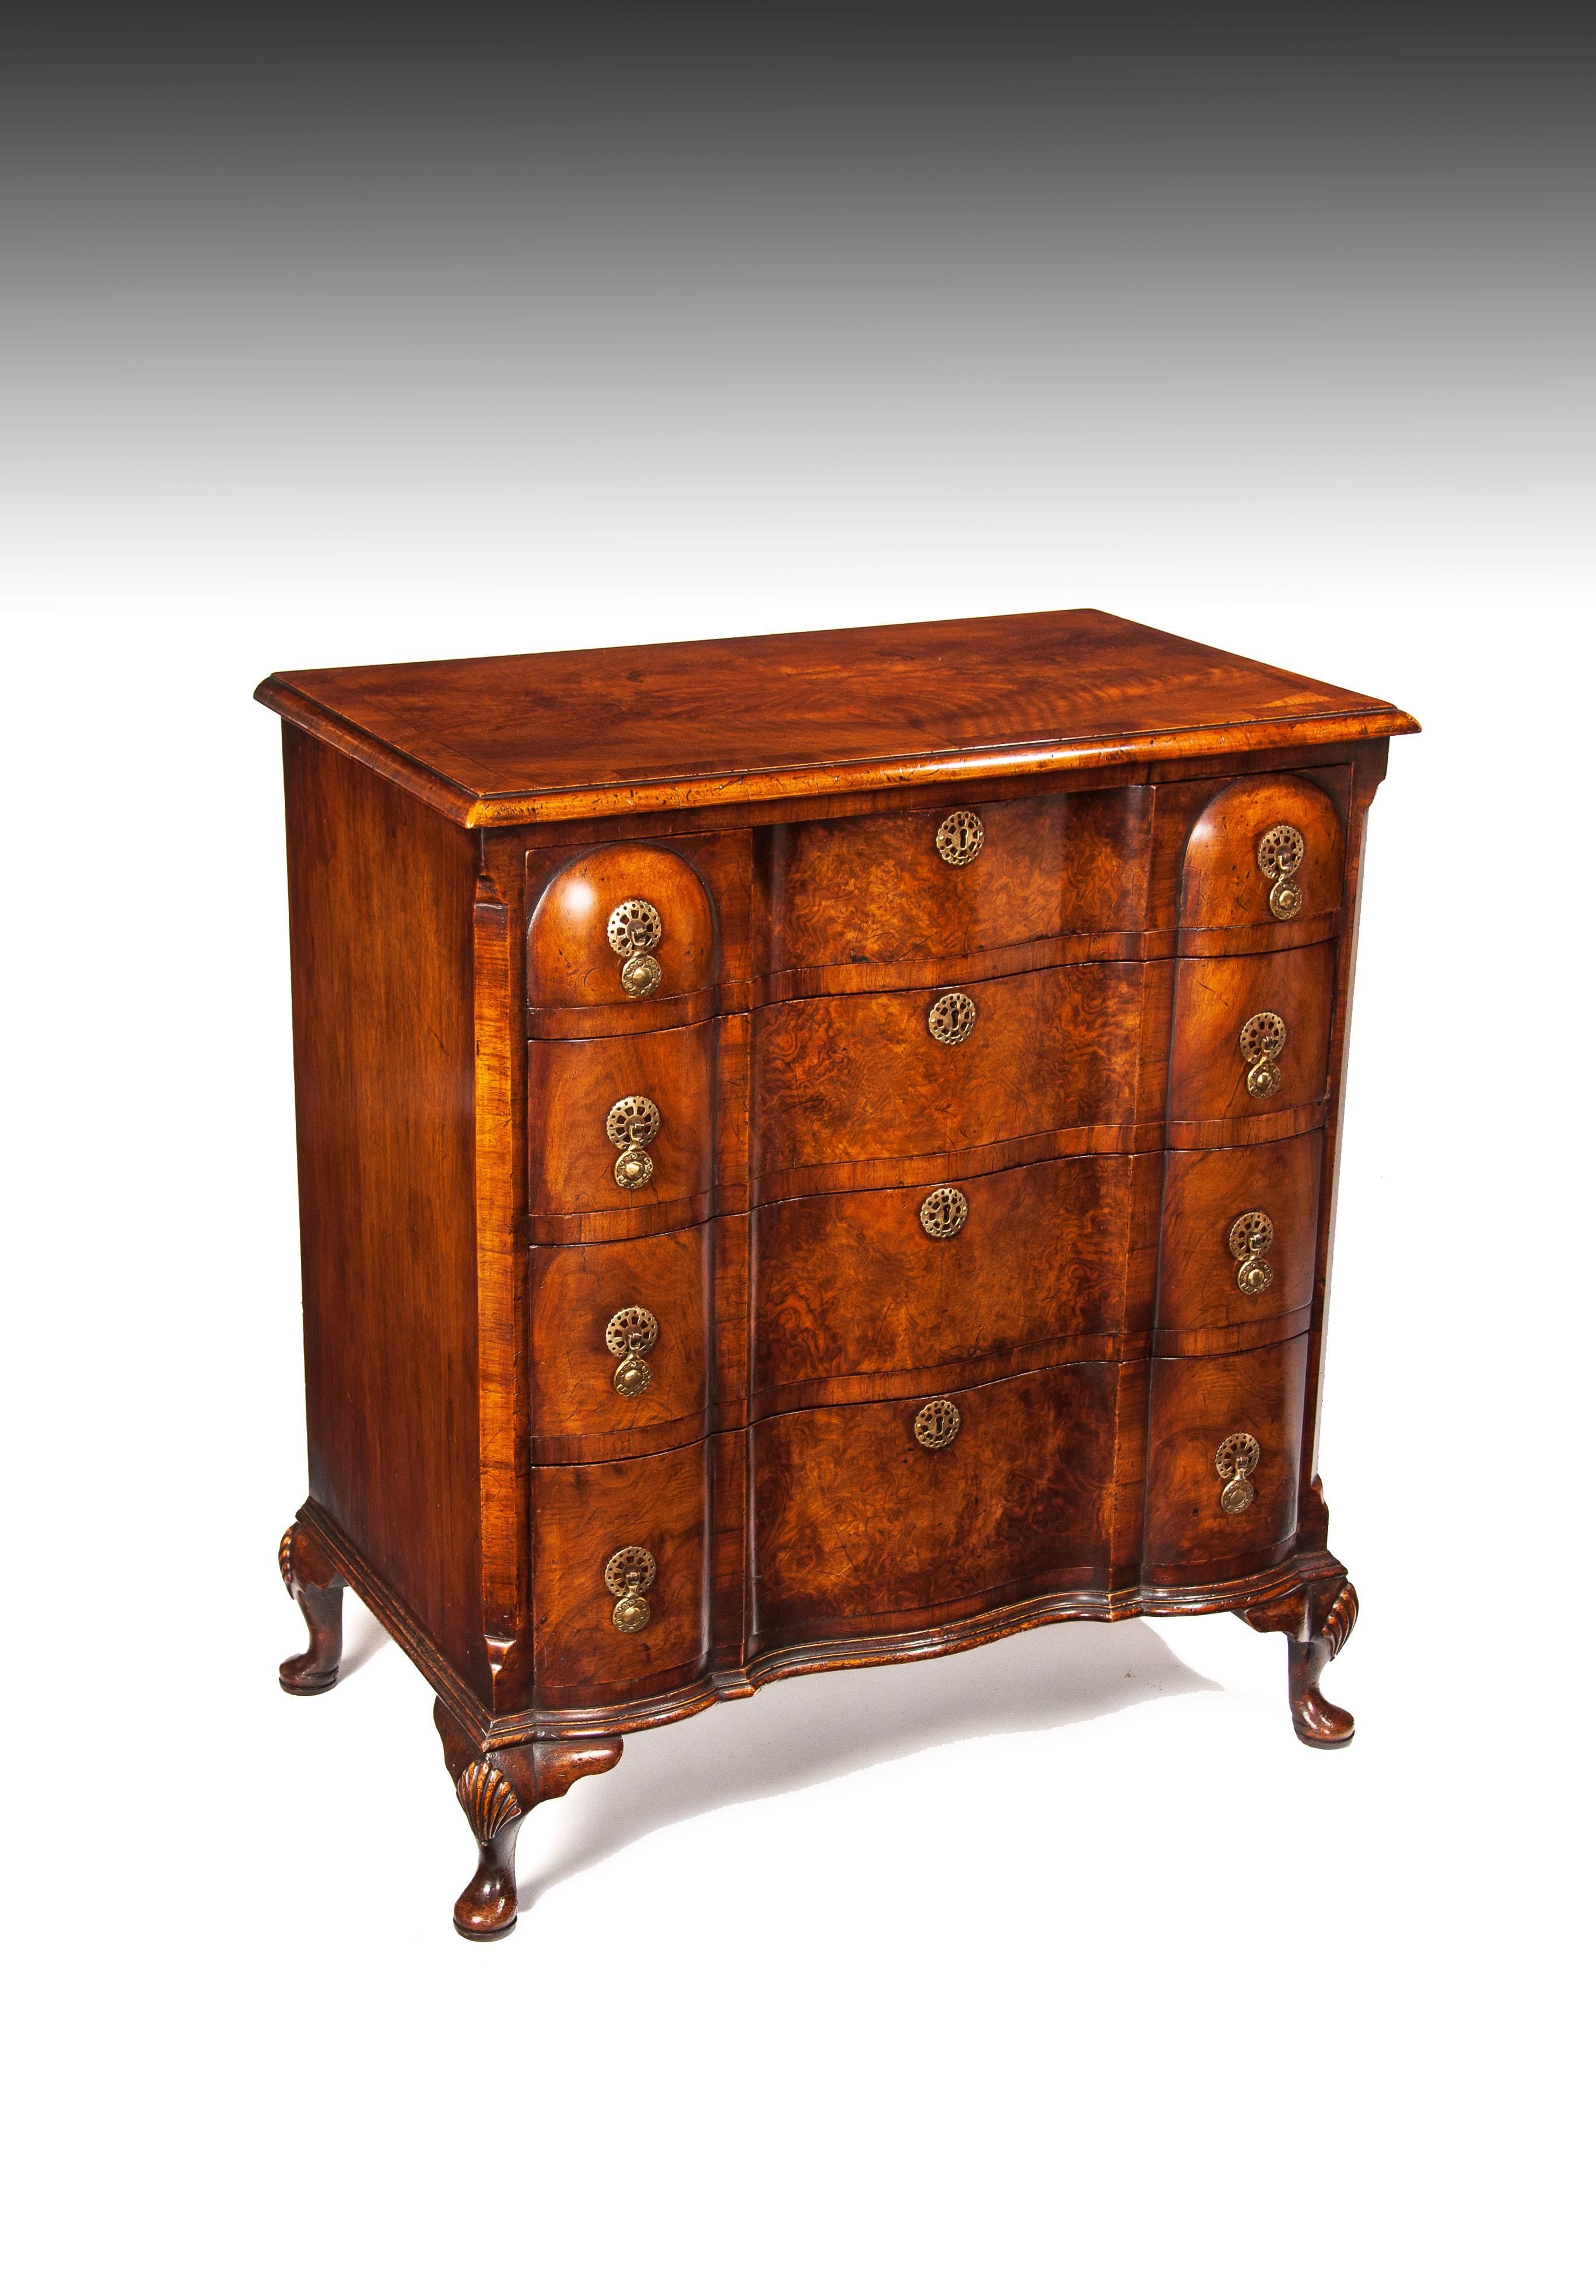 A superb quality antique shaped front walnut chest of drawers standing on cabriole feet, Queen Anne Style.

English, circa 1900.


The construction of this chest of drawers has been closely matched to an 18th Century example with fine attention